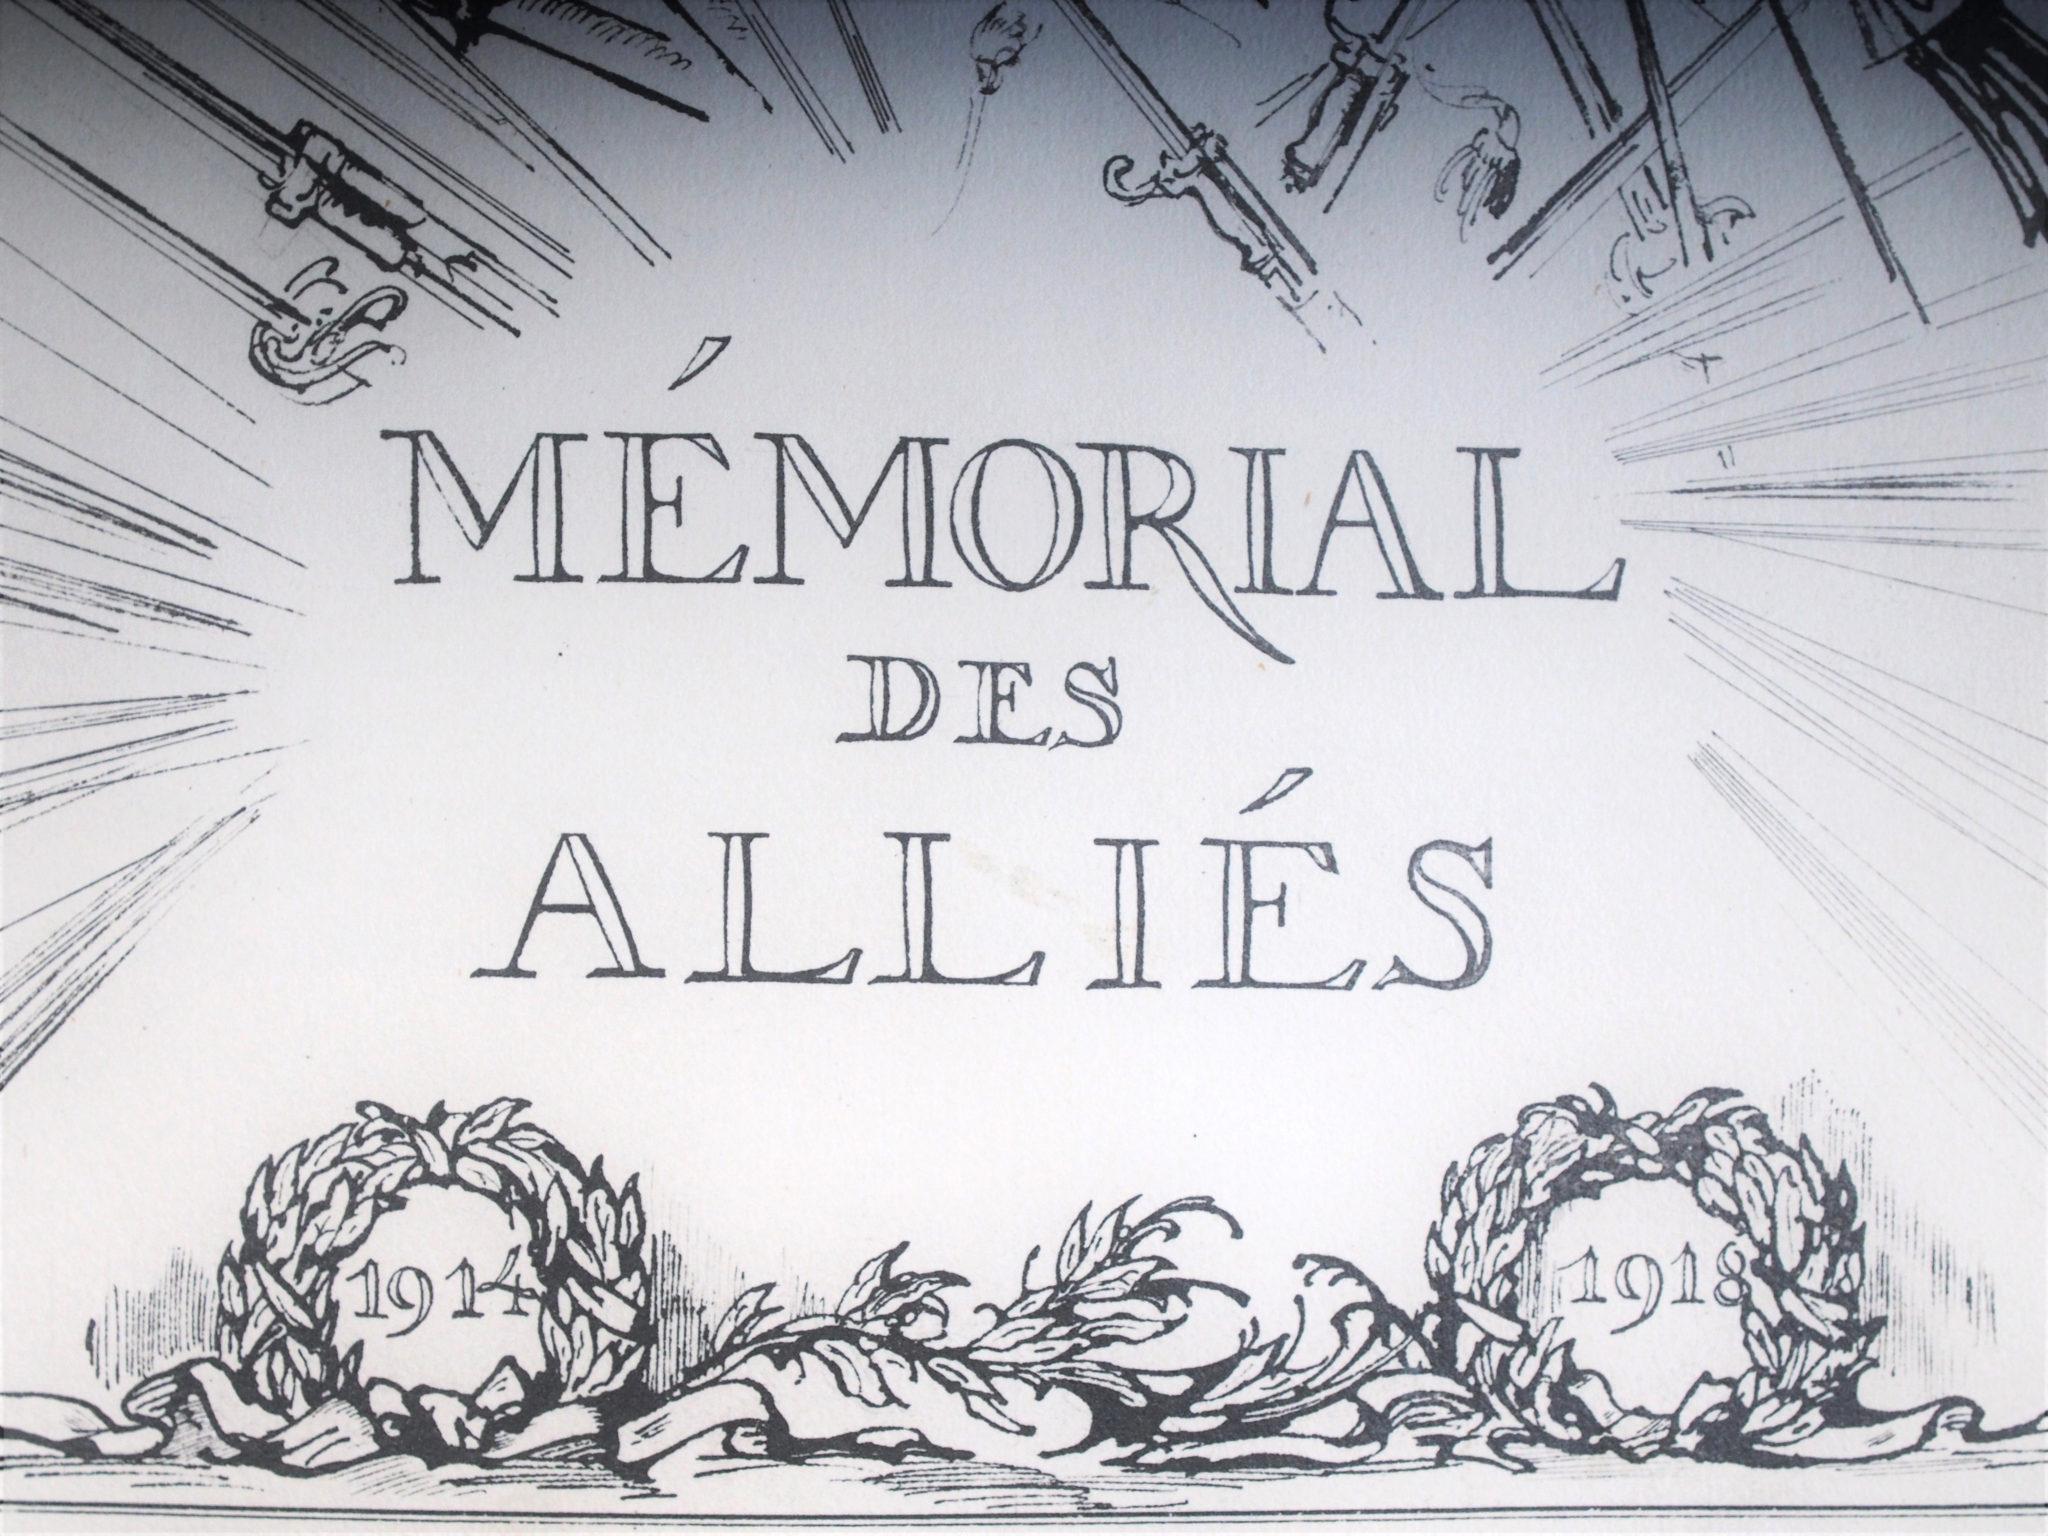 WWI MEMORIAL DES ALLIES 1914 - 1918
Beautiful Large French World War I Leather Book 
Copyright 1926 by Les Fils de la Liberte 
This French Book has a large hardcover folio, full tan leather with gilt top edge, and gilt dentelle. The cover lightly